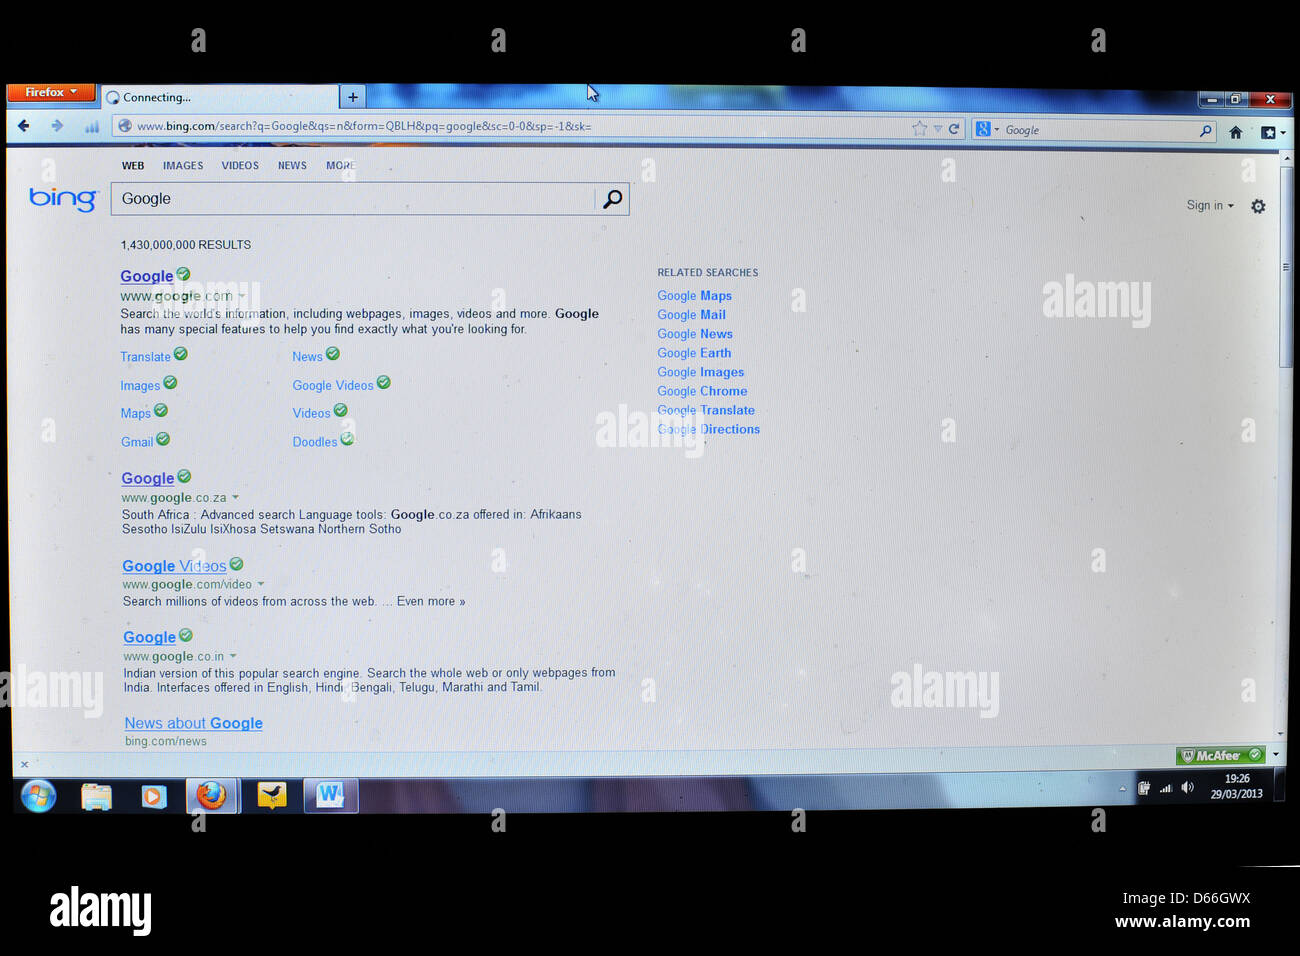 Image of a computer screen a search for Google on the Bing search engine. Stock Photo